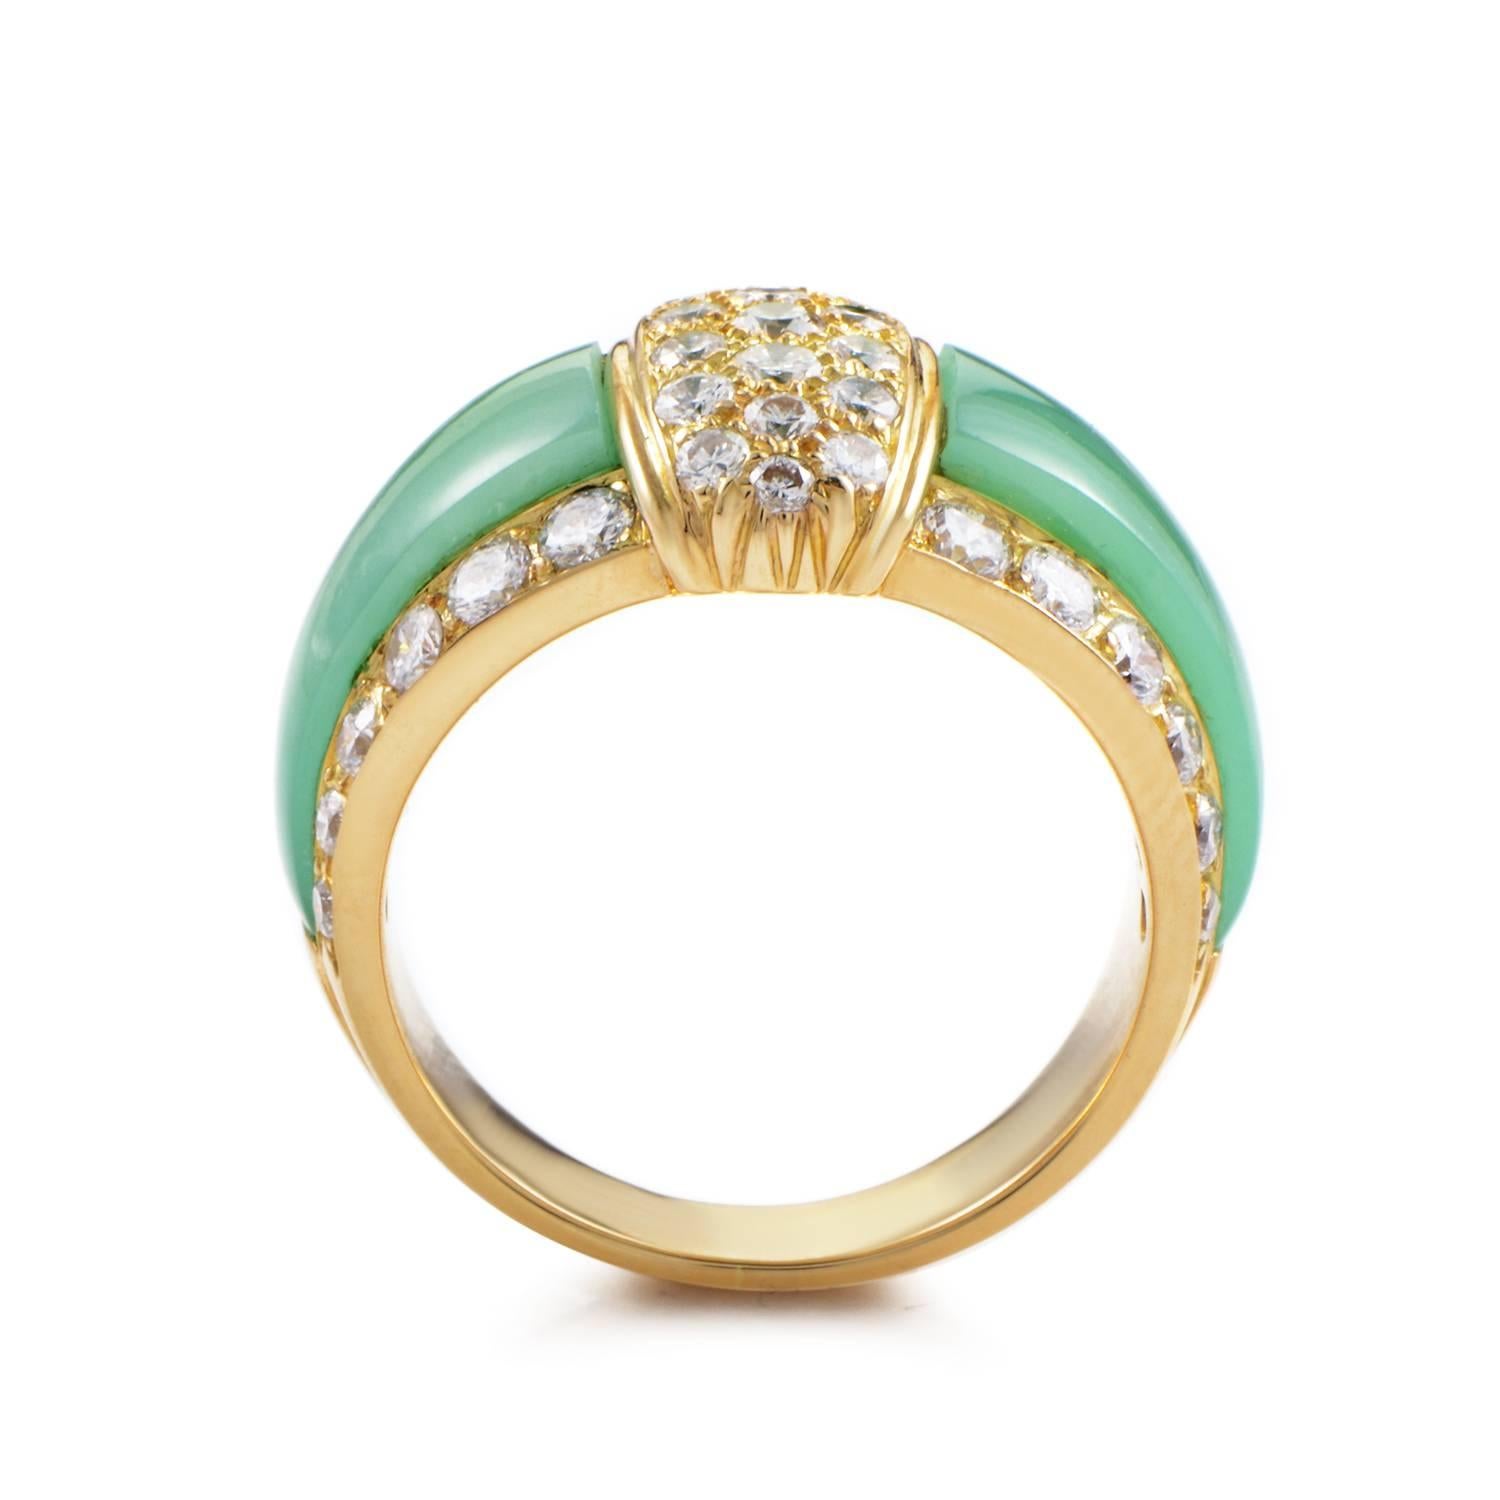 A unique turn of luxury unfolds in this ring design from Van Cleef & Arpels. The band rises in 18K Yellow Gold. Its arcing trajectory takes on the compelling sheen of green chrysoprase. In the wings are twin threads of 1.43ct diamonds adding